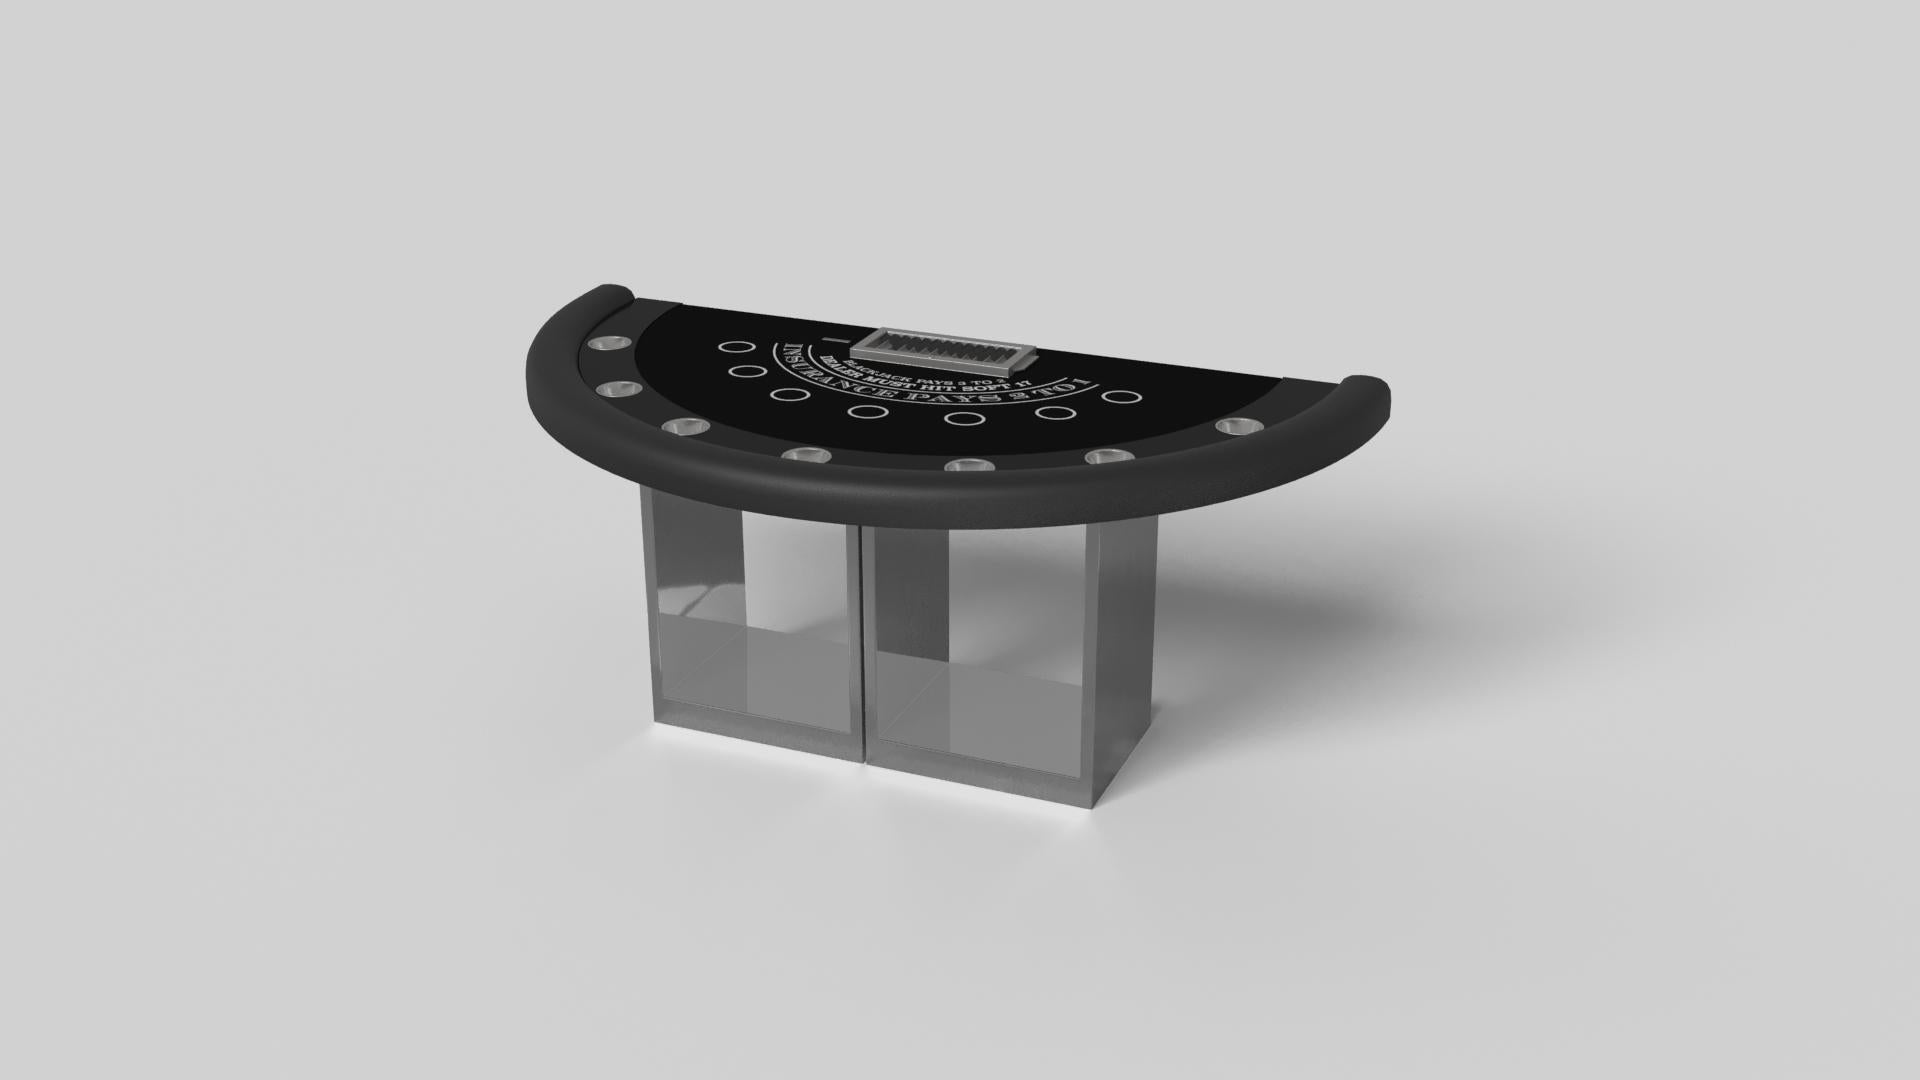 Supported by two rectangular open pedestals as the base, the Ambrosia blackjack table is modern and minimalistic with its combination of simple, geometric forms. Viewed from the front, the use of negative space is evident; viewed from the side, the